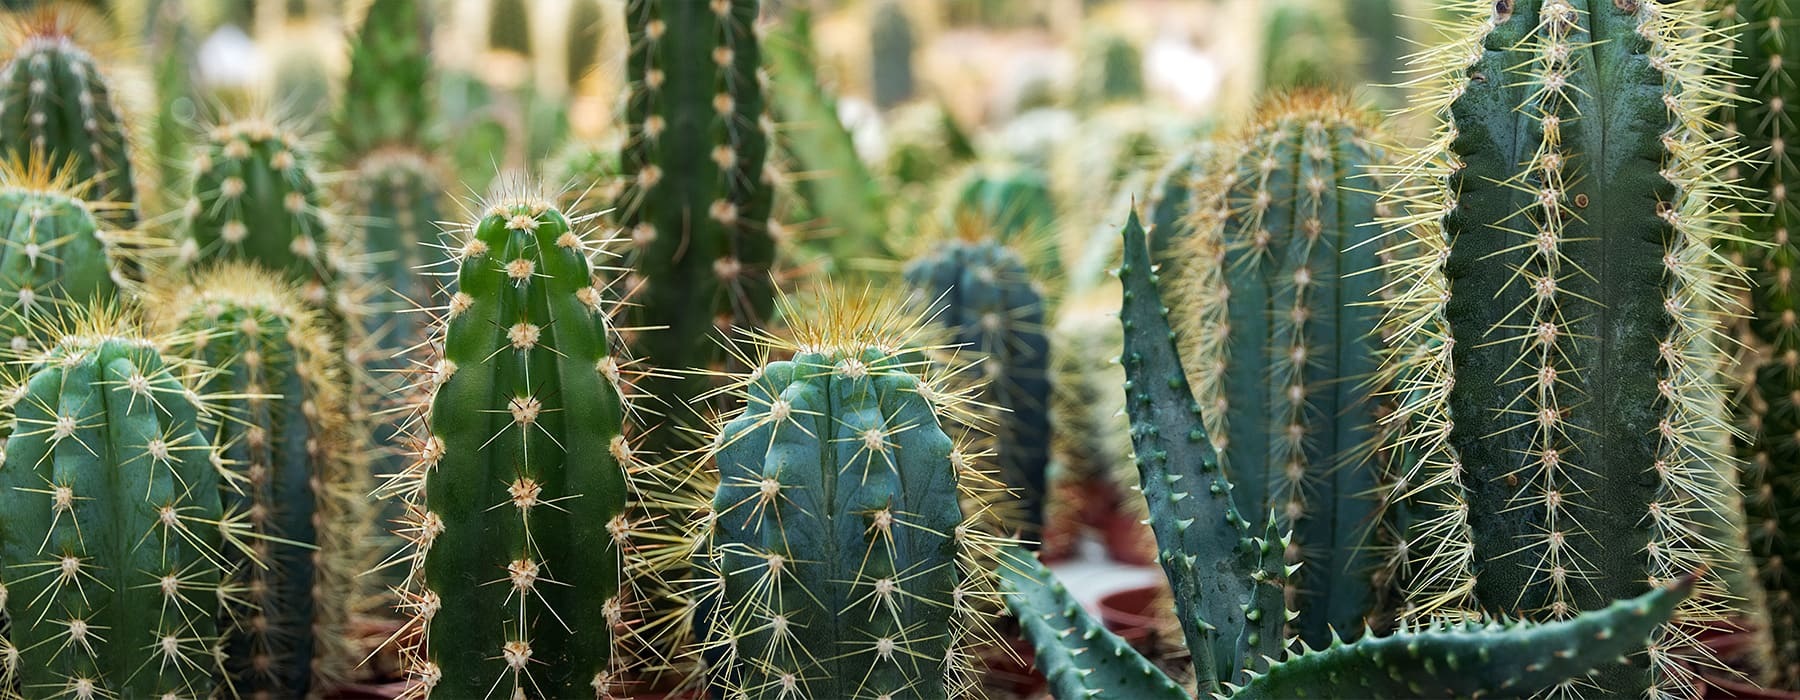 view of a cactus garden showing many types and green lush cactus colors